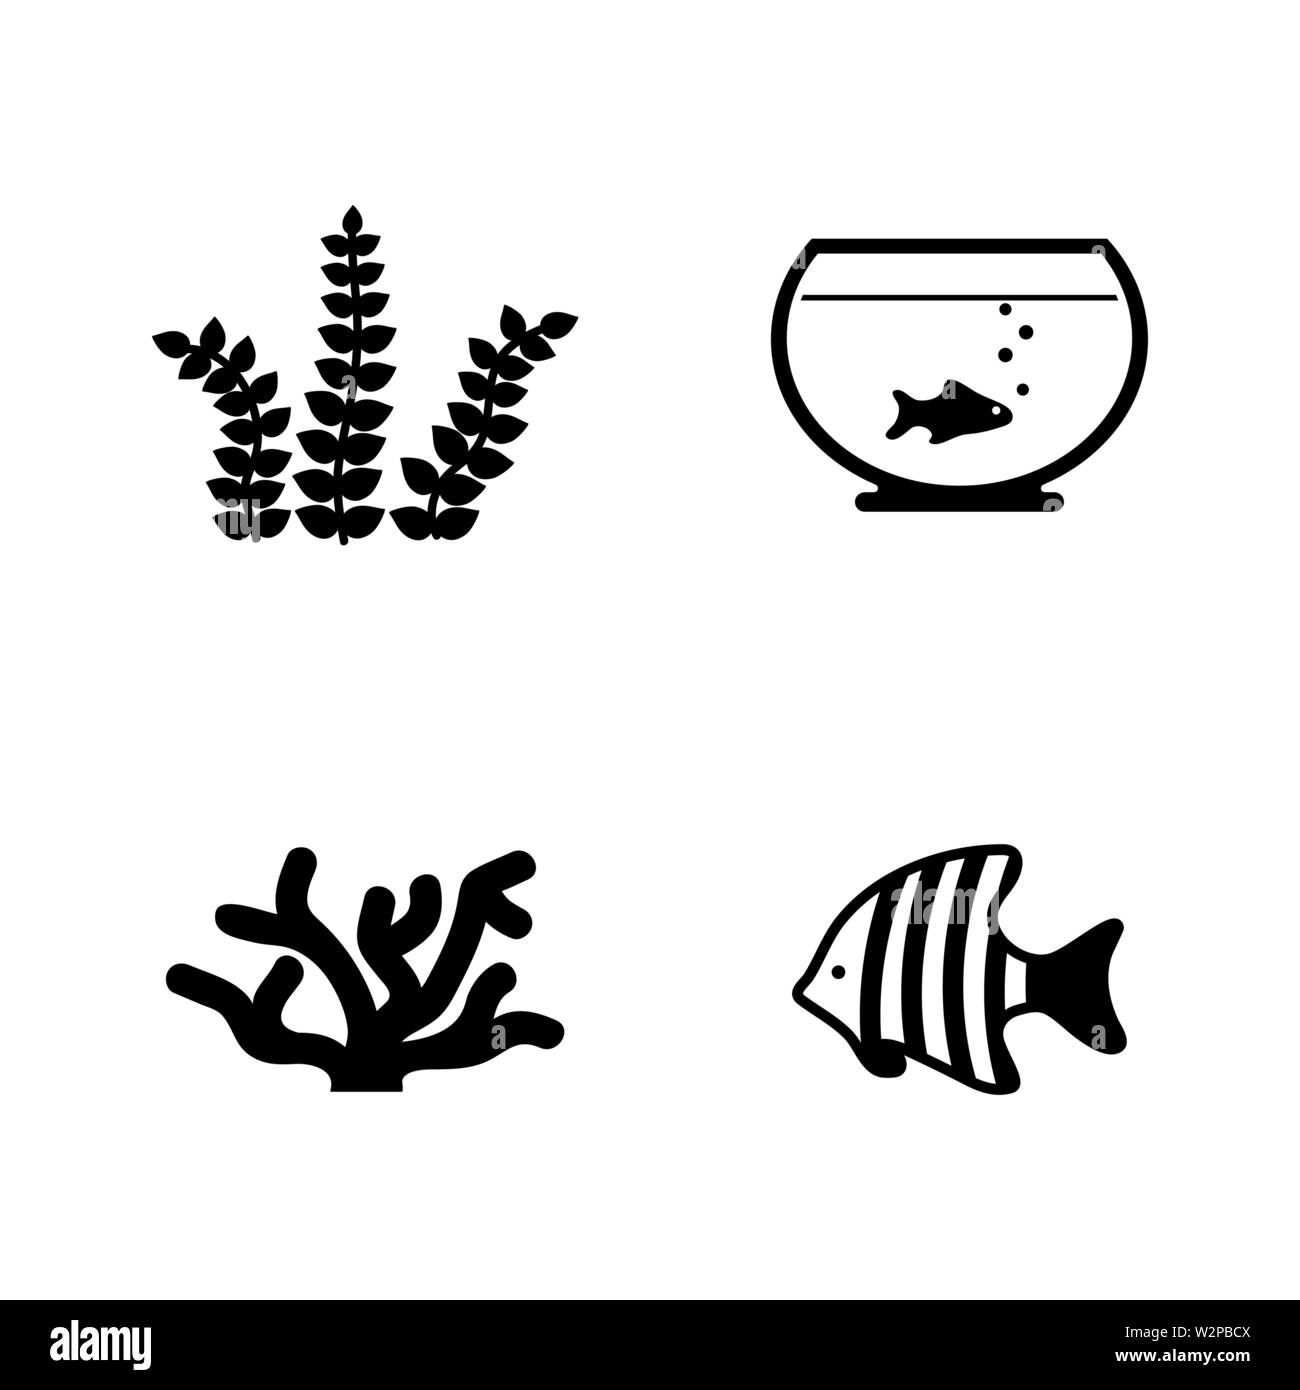 Aquarium Inhabitants. Simple Related Vector Icons Set for Video, Mobile Apps, Web Sites, Print Projects and Your Design. Black Flat Illustration on Wh Stock Vector